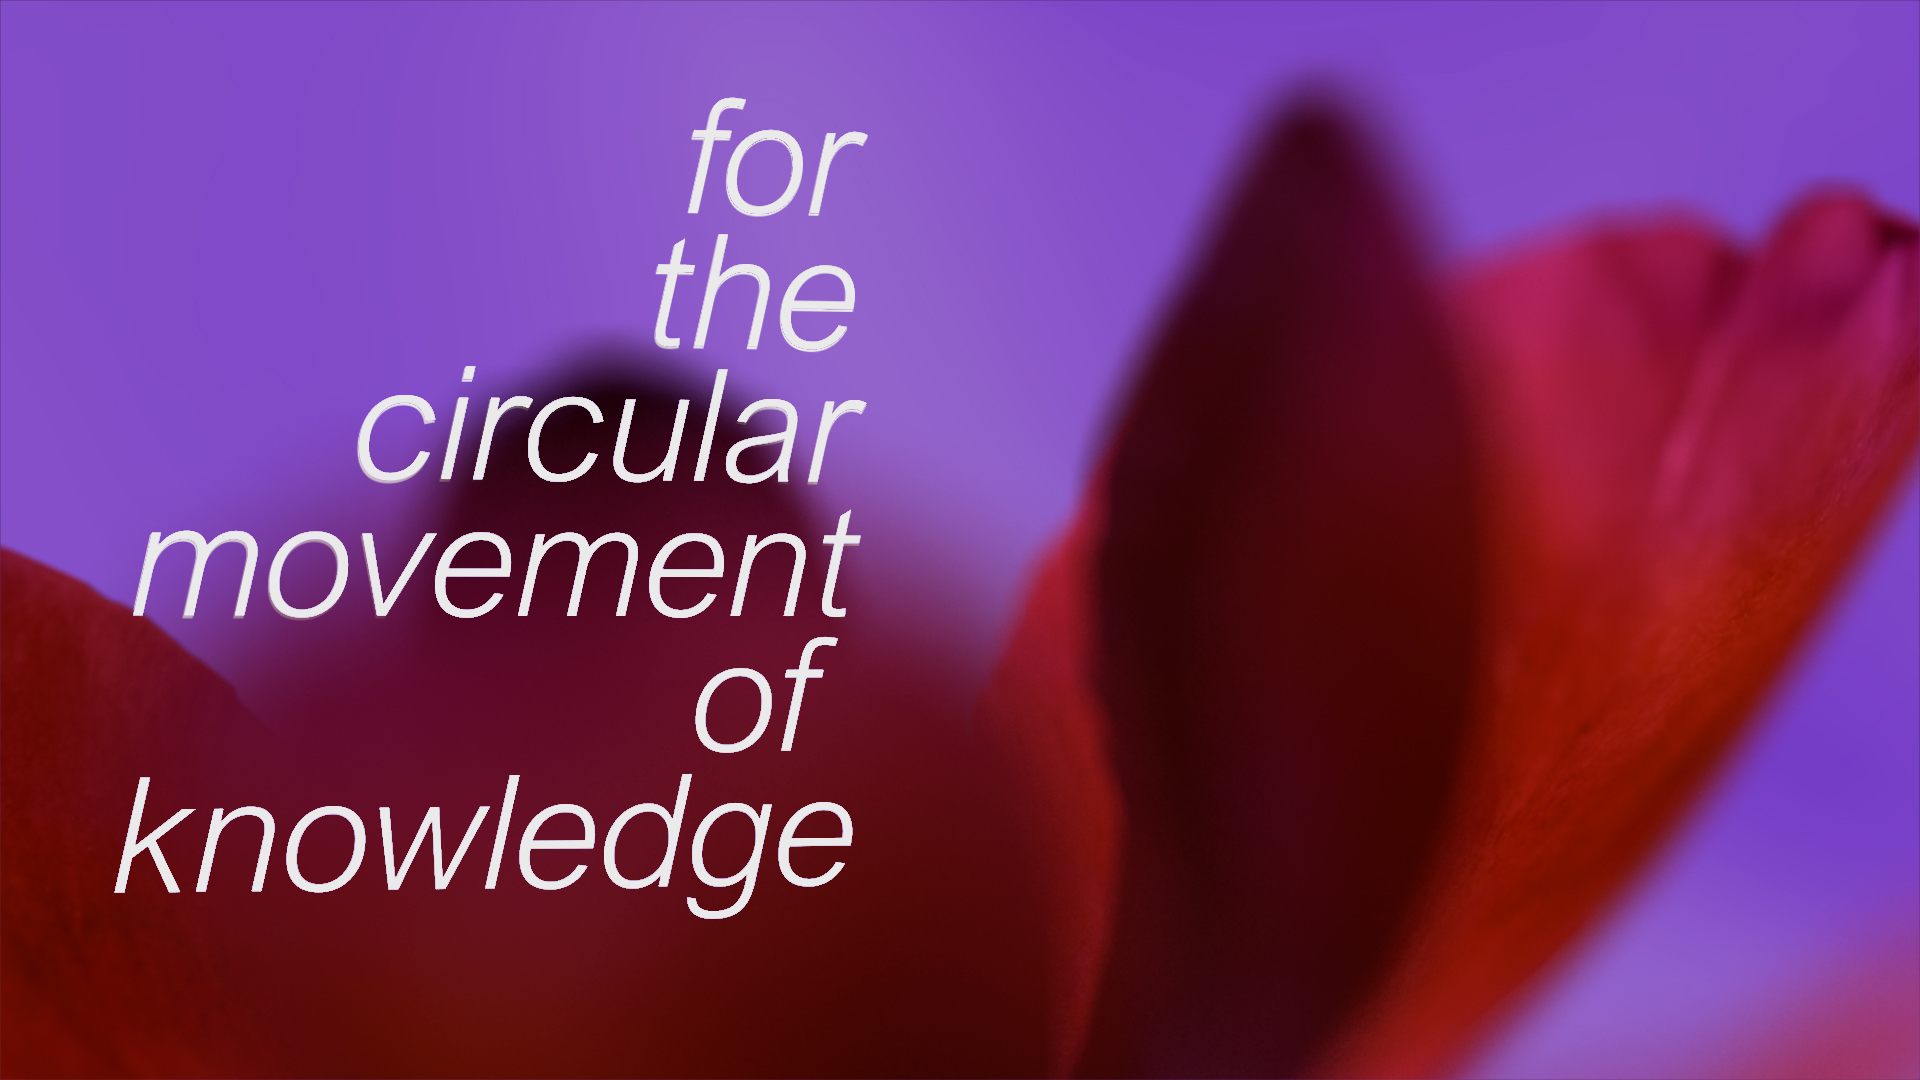 for the circular movement of knowledge ~   Feras Shaheen and Amir Sabra